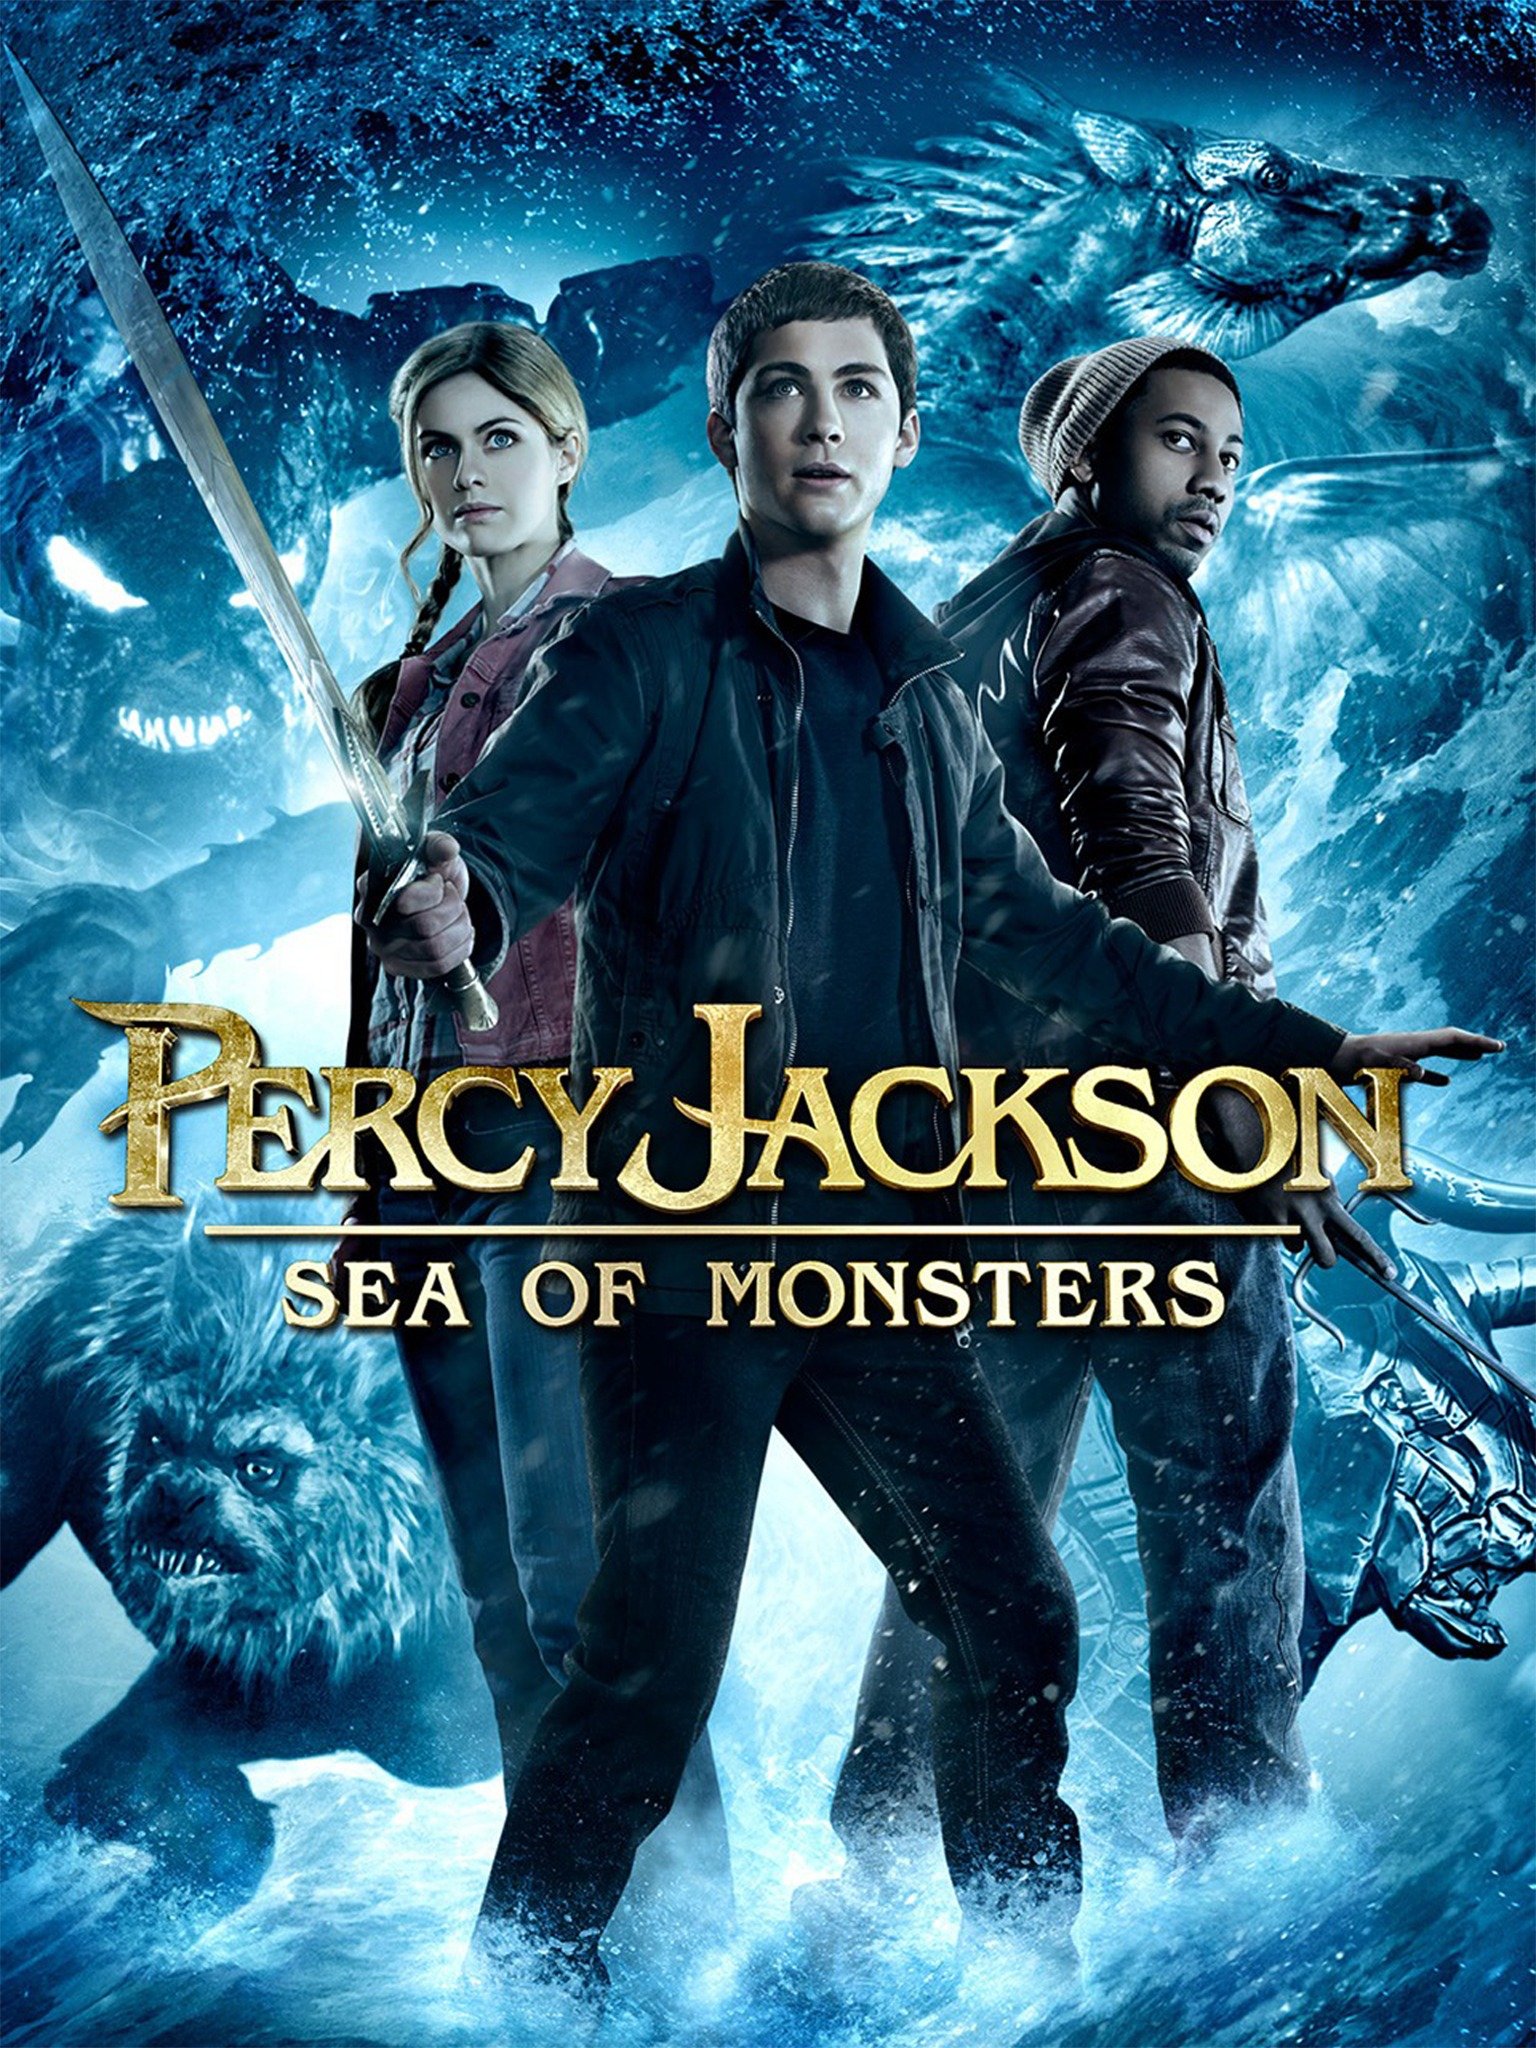 Is there going to be a 3rd percy jackson movie Percy Jackson Sea Of Monsters 2013 Rotten Tomatoes